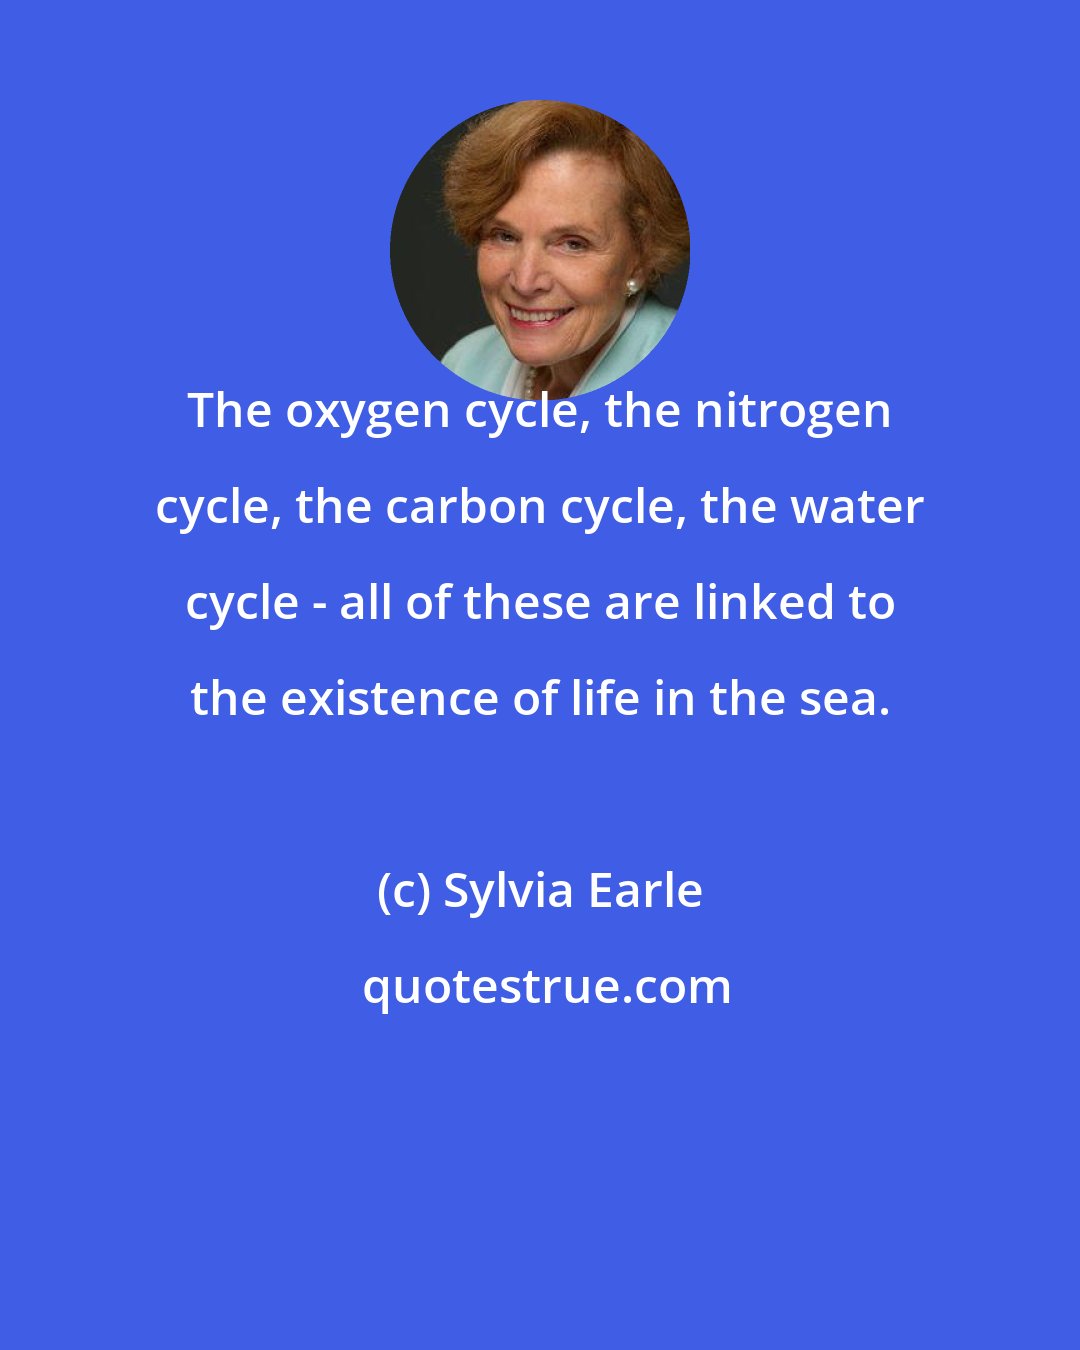 Sylvia Earle: The oxygen cycle, the nitrogen cycle, the carbon cycle, the water cycle - all of these are linked to the existence of life in the sea.